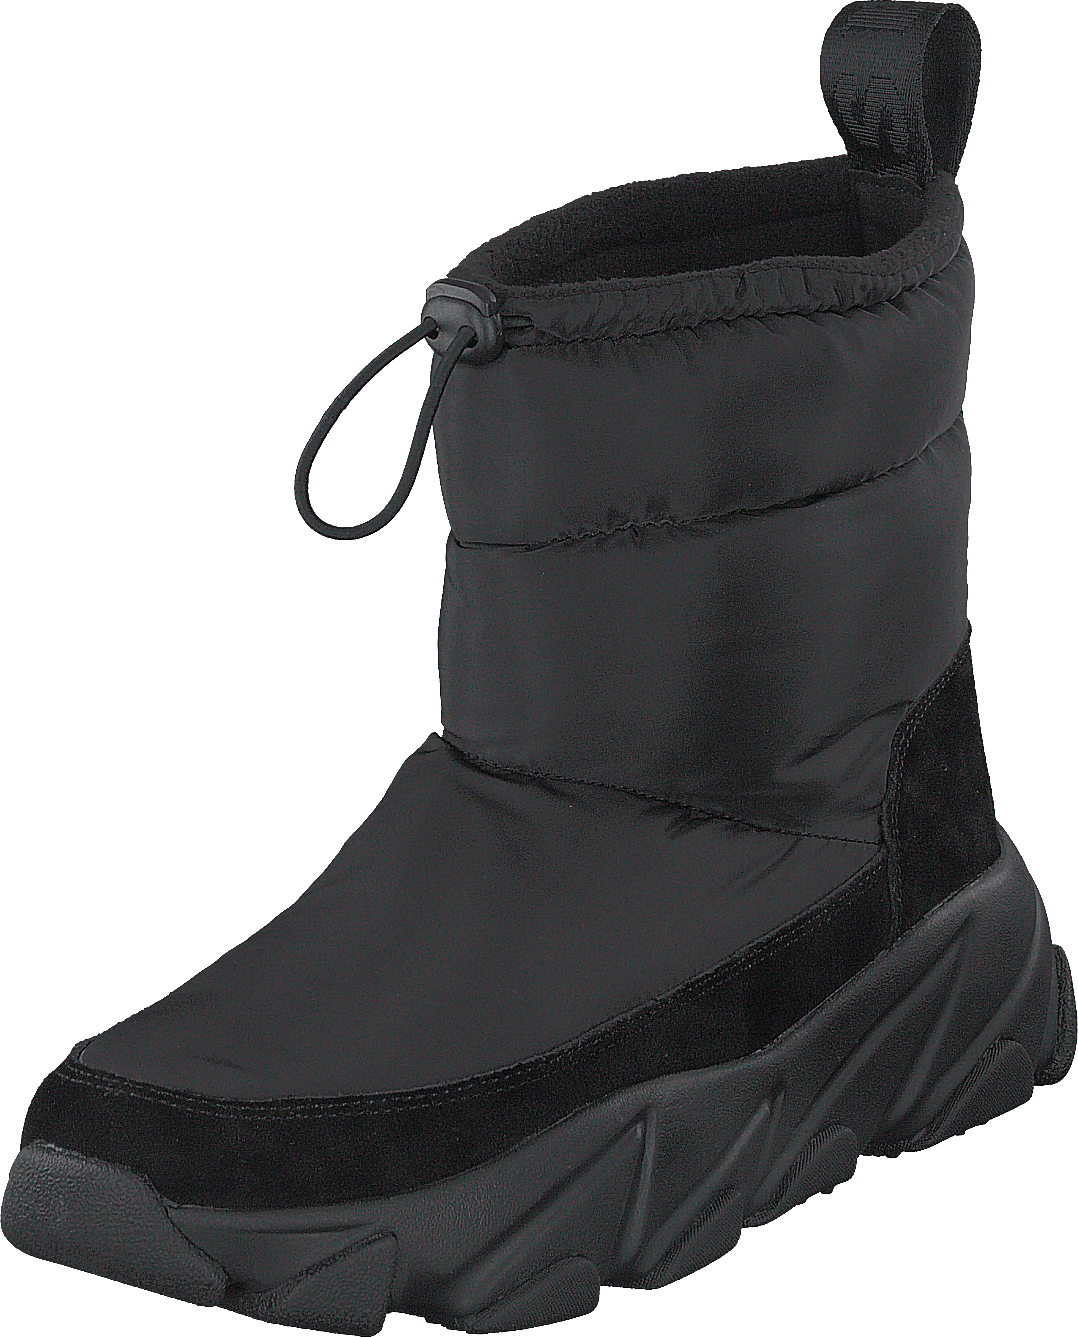 Low Winter Boots Black